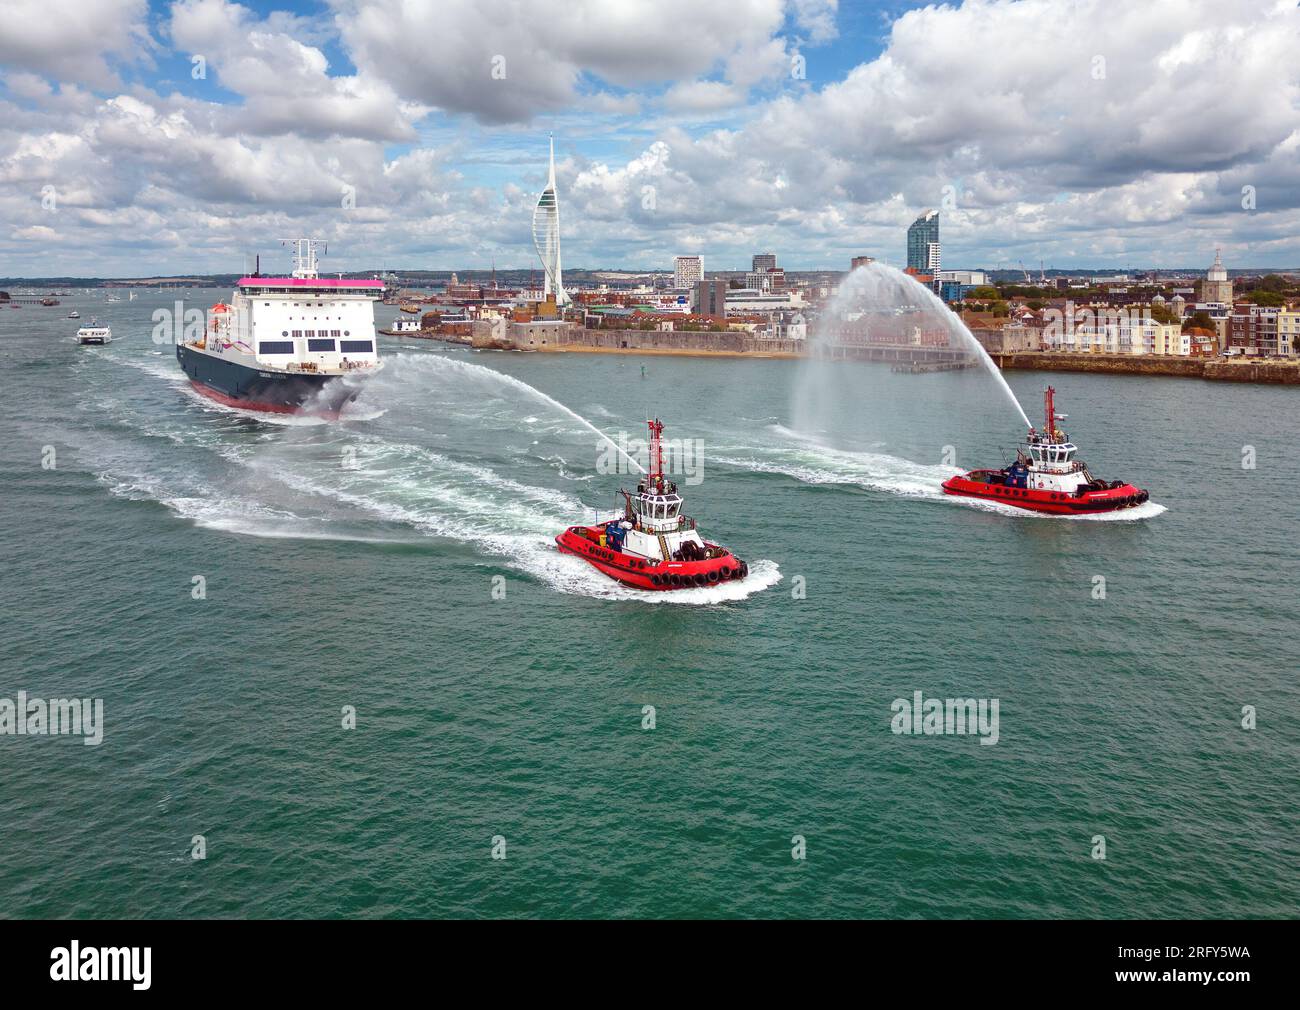 A tug escort with water salute for Condor Islander, a cross-Channel ROPAX ferry operated by Condor Ferries. Stock Photo